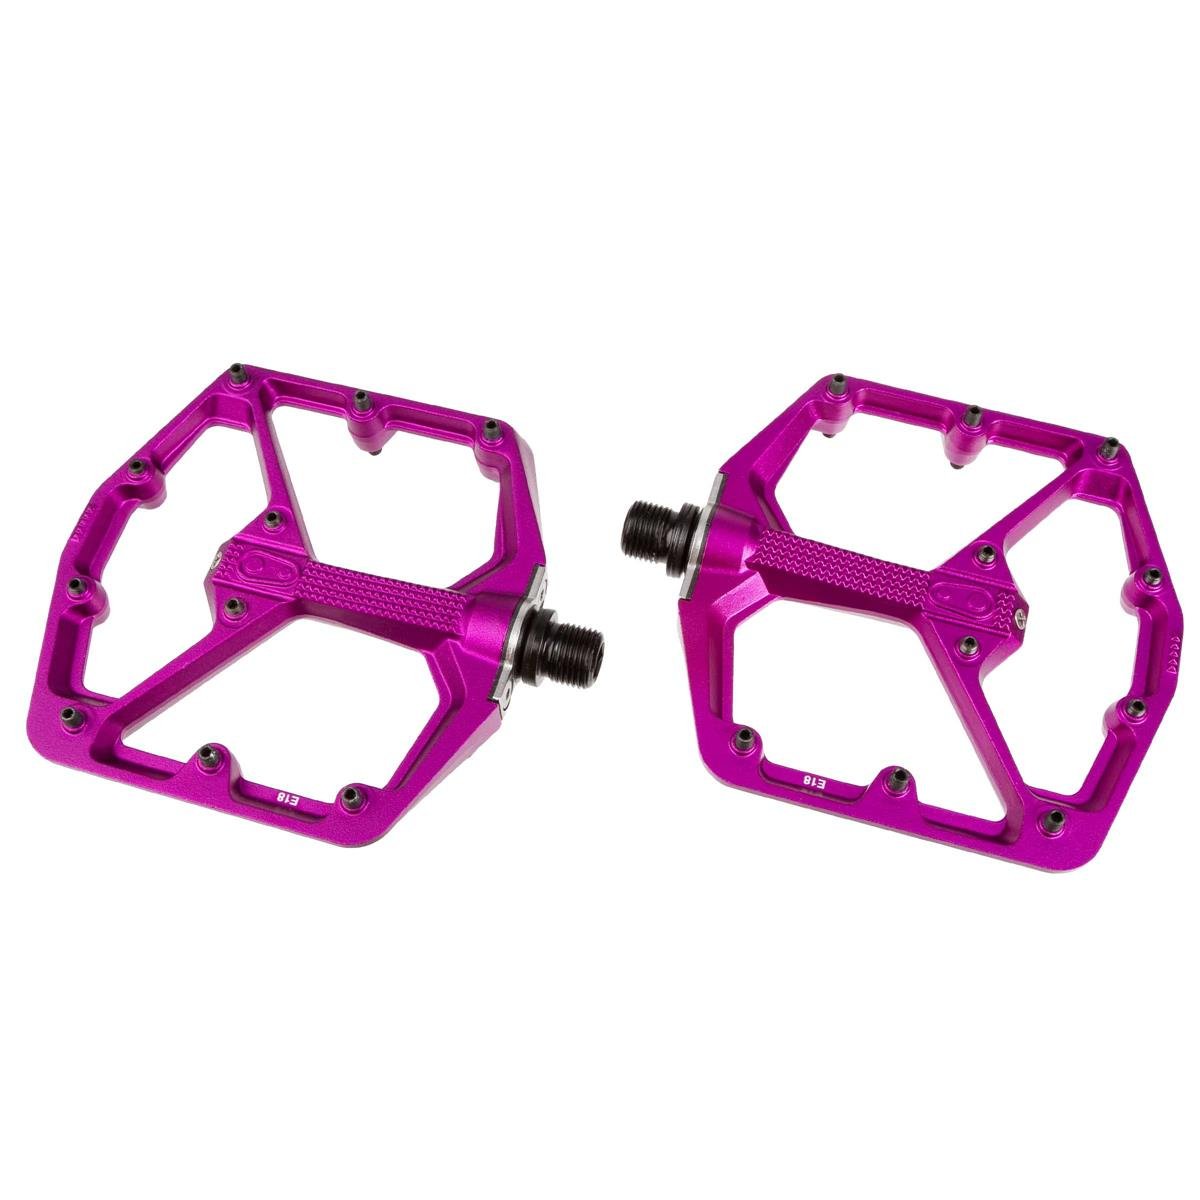 Crankbrothers Pedals Stamp 7 Limited Edition, Purple, Large